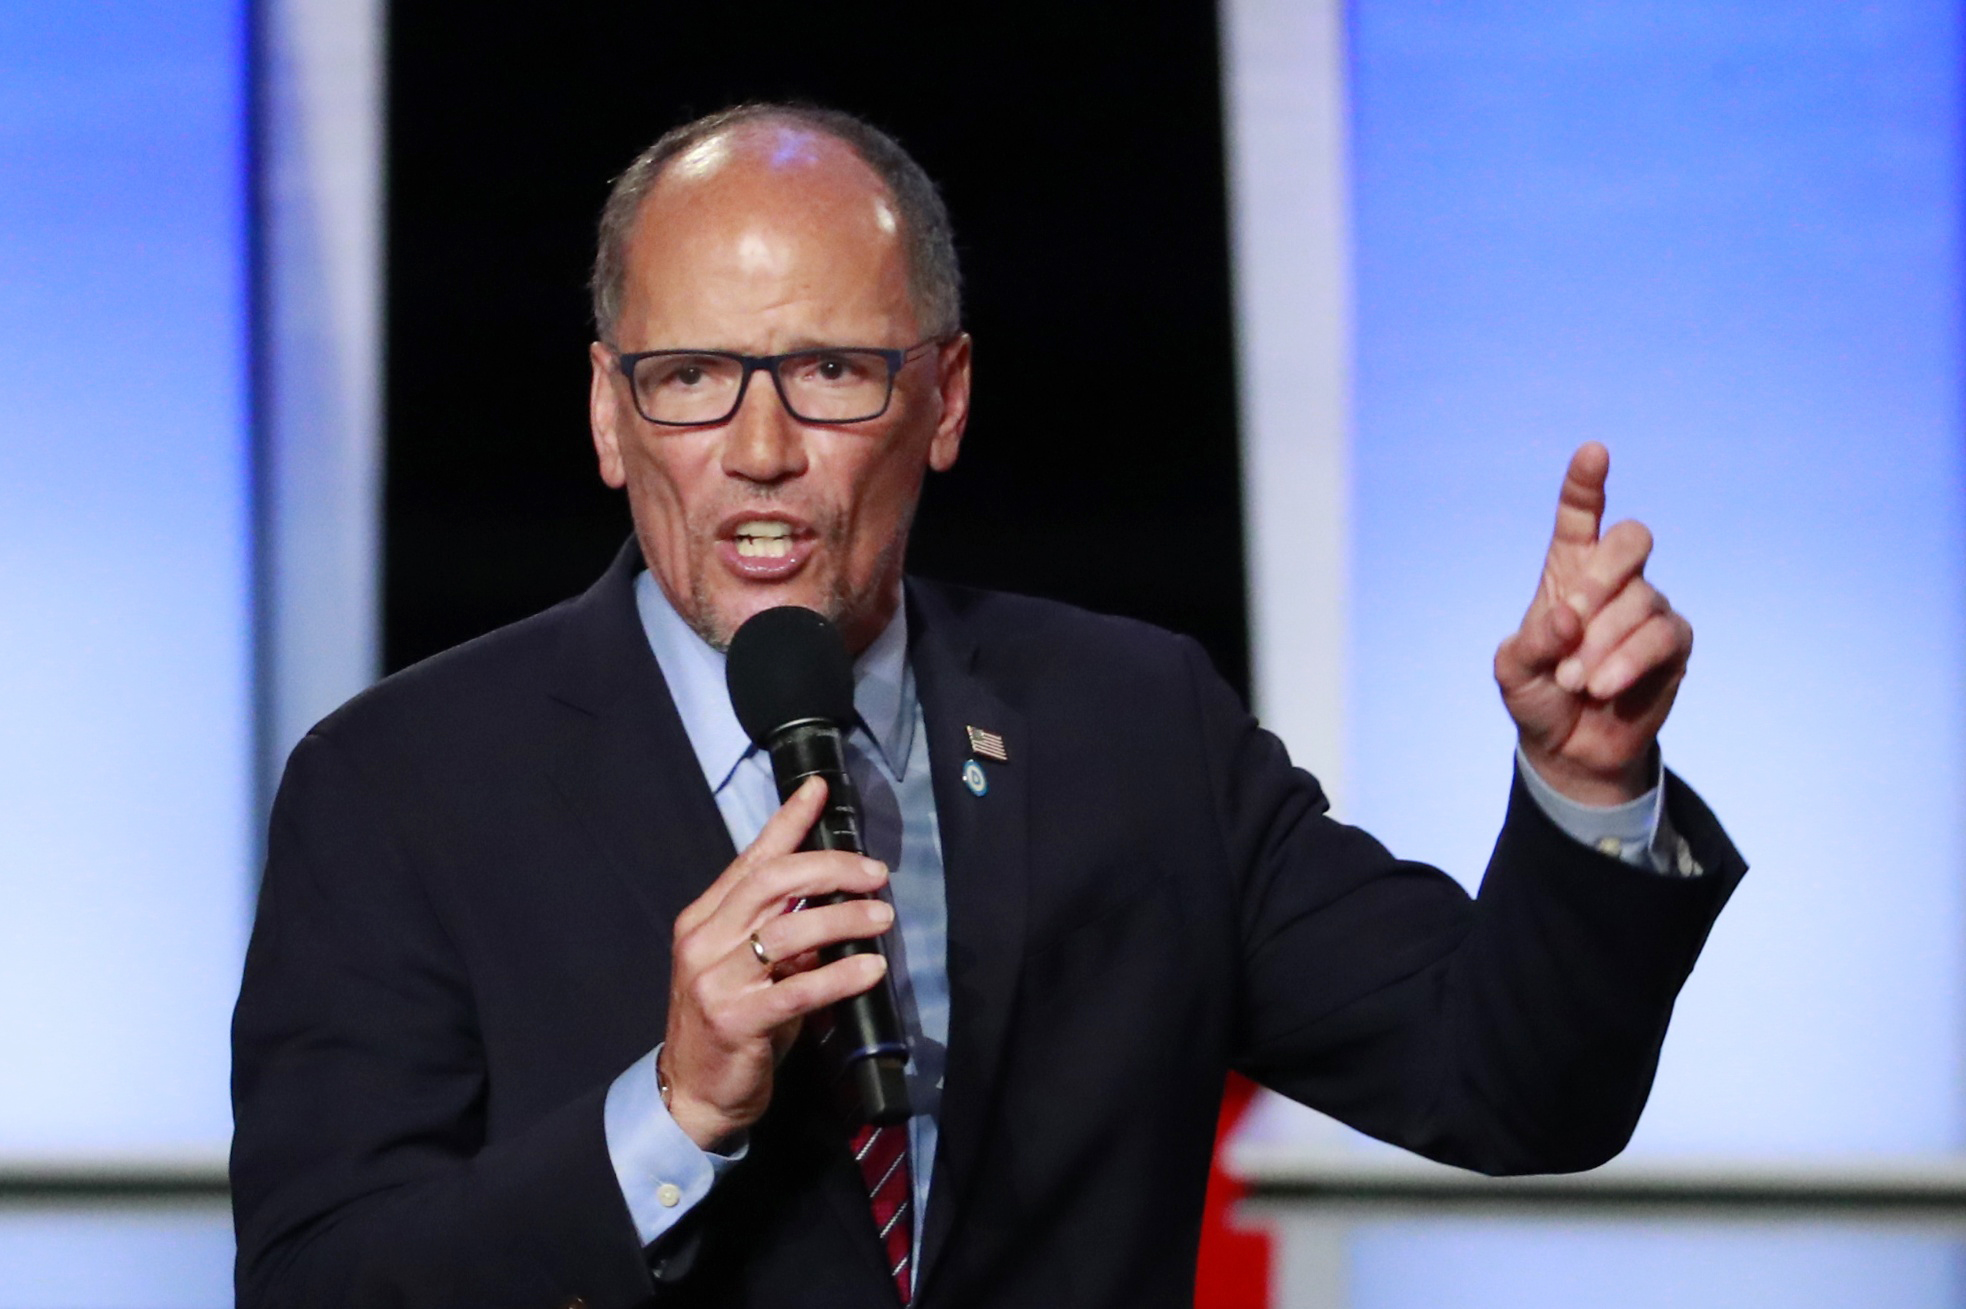 DNC chair Tom Perez addresses attendees at the 2020 presidential Democratic candidates debate in Detroit. July 31, 2019. REUTERS/Lucas Jackson